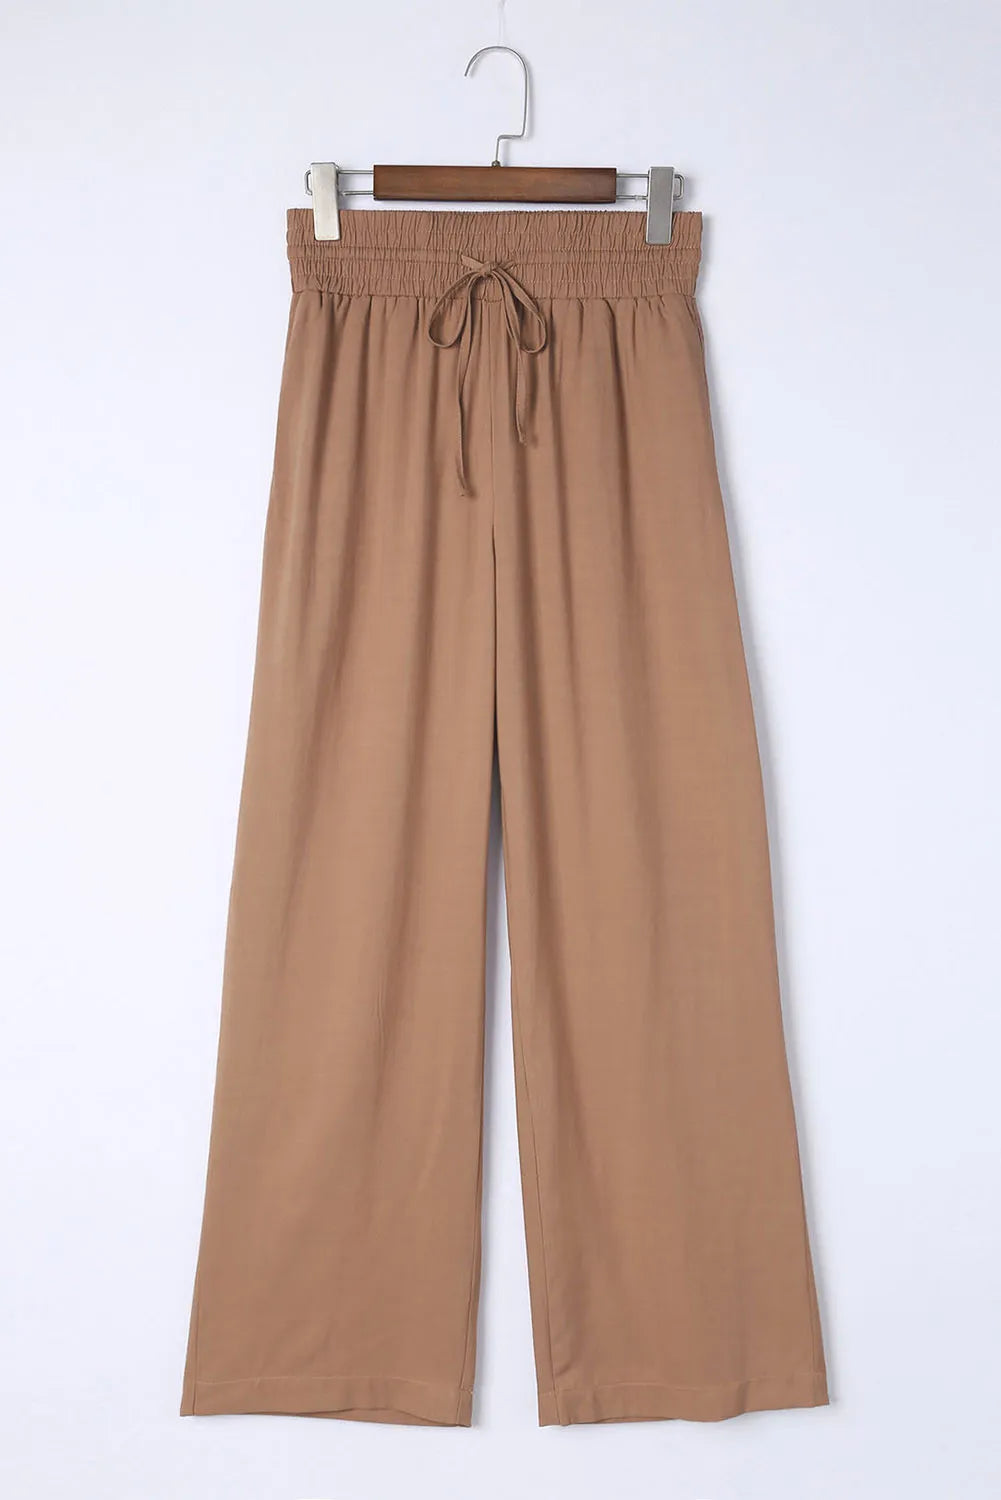 Women's Everyday Casual Pants | Heidi Drawstring Wide Leg Pant available in 3 colors: Black, Coffee Brown, and Deep Teal Blue. Elastic Comfort Stretch Drawstring Waist, Straight Wide Leg